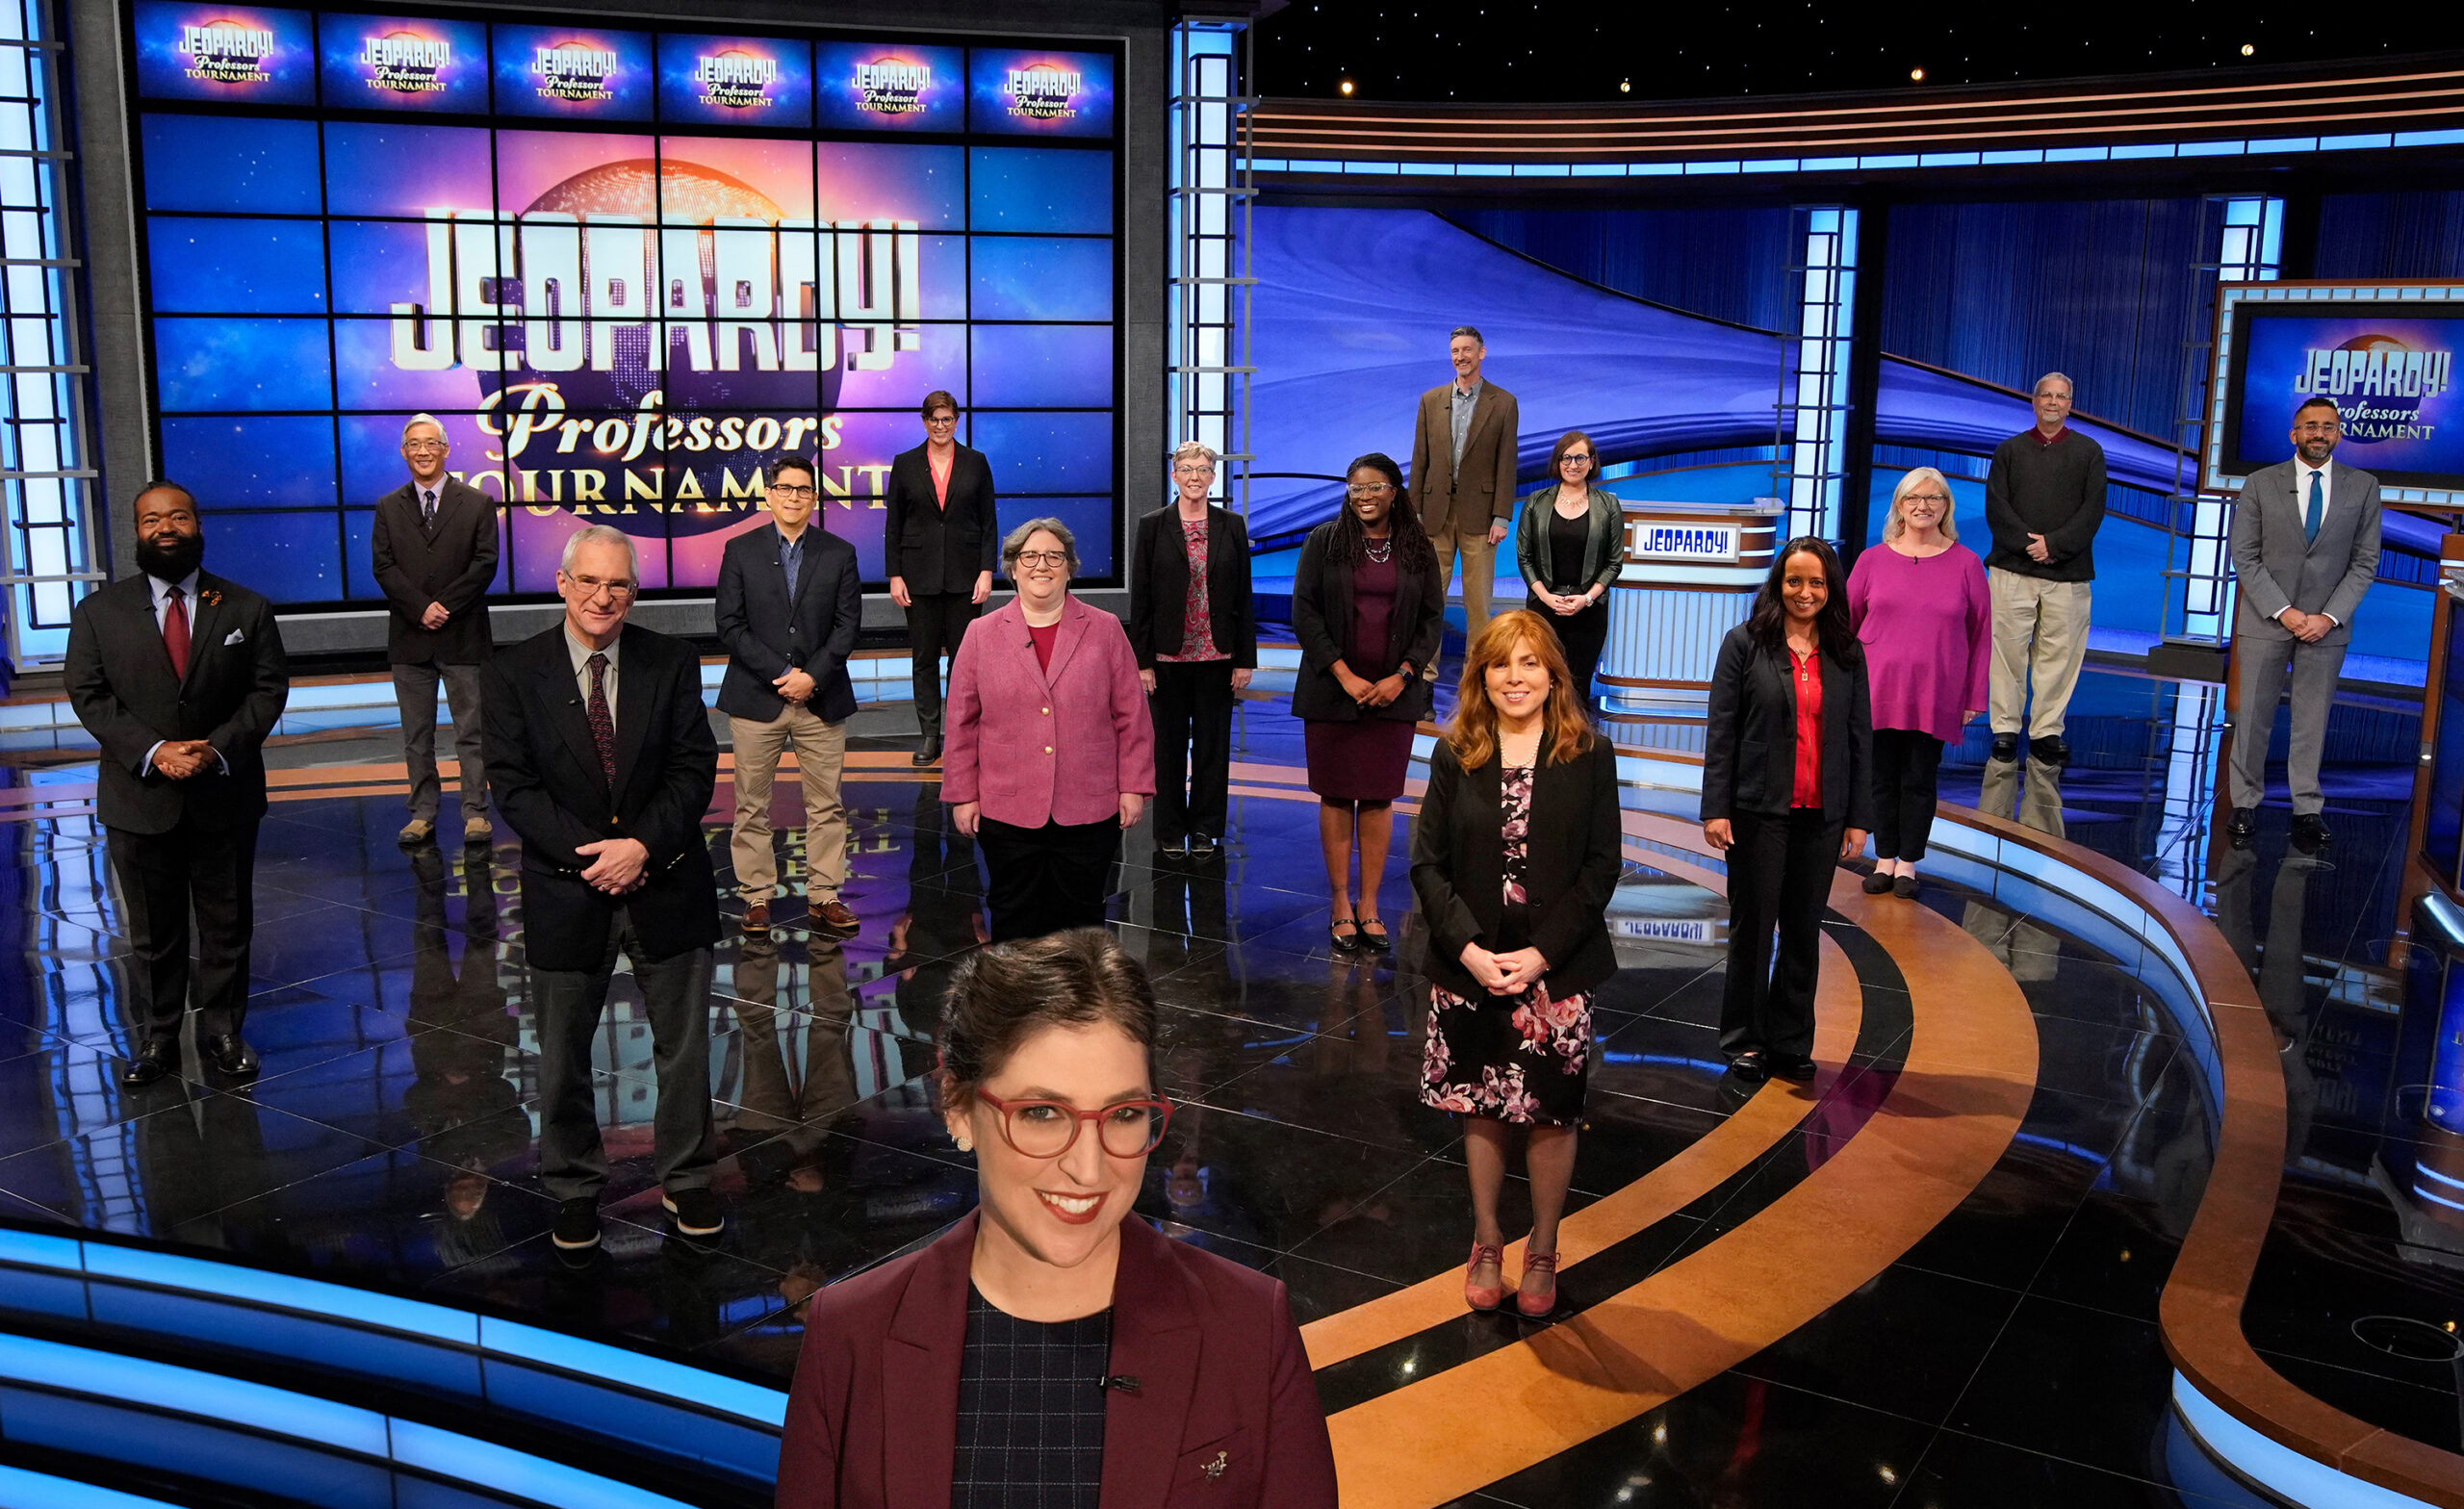 Jeopardy! host Mayim Bialik standing on set in front of the contestants of the Professors Tournament.